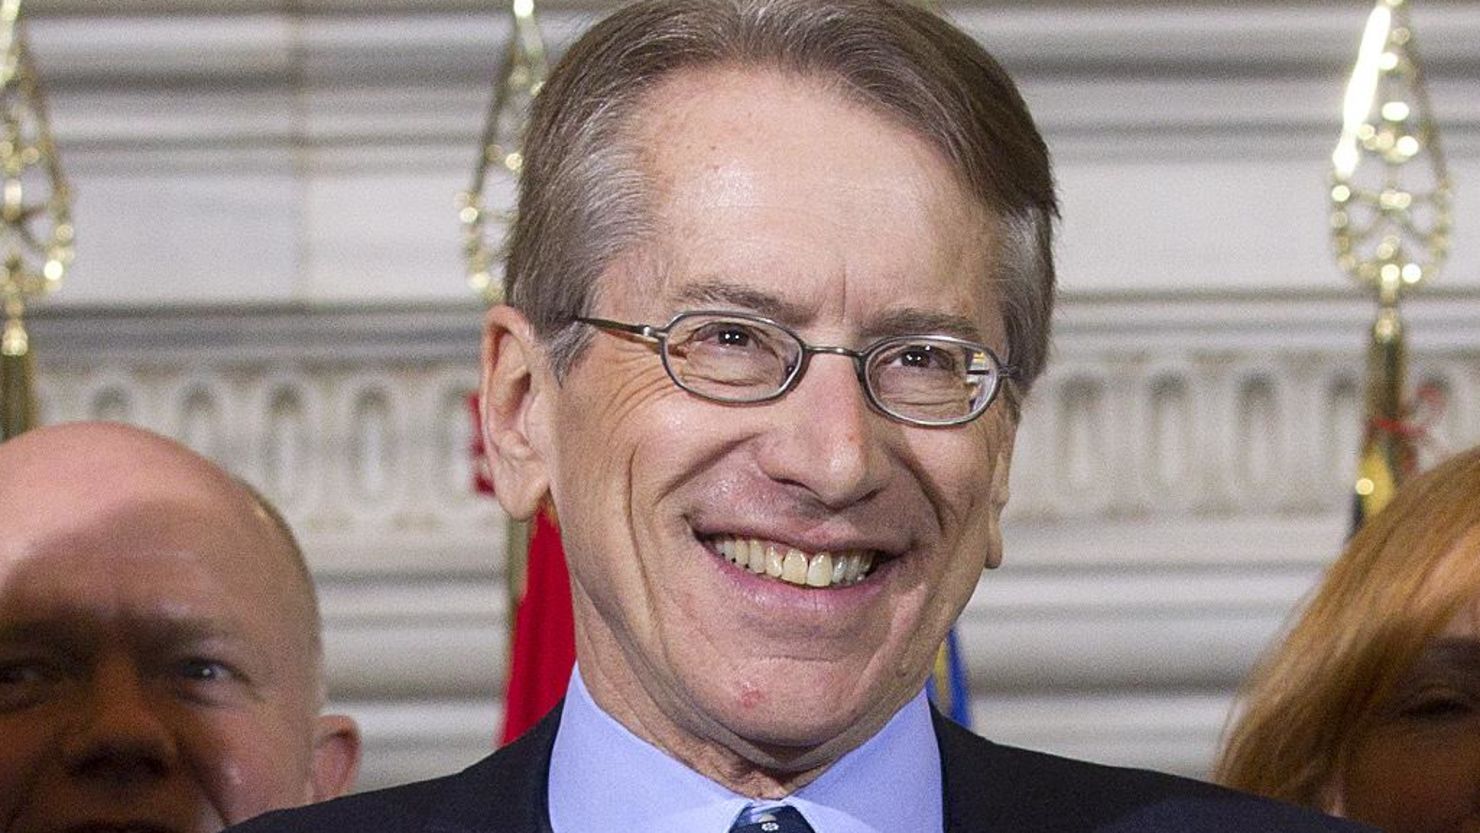 Italy's foreign minister Giulio Terzi (center), pictured in February, resigned on Tuesday.